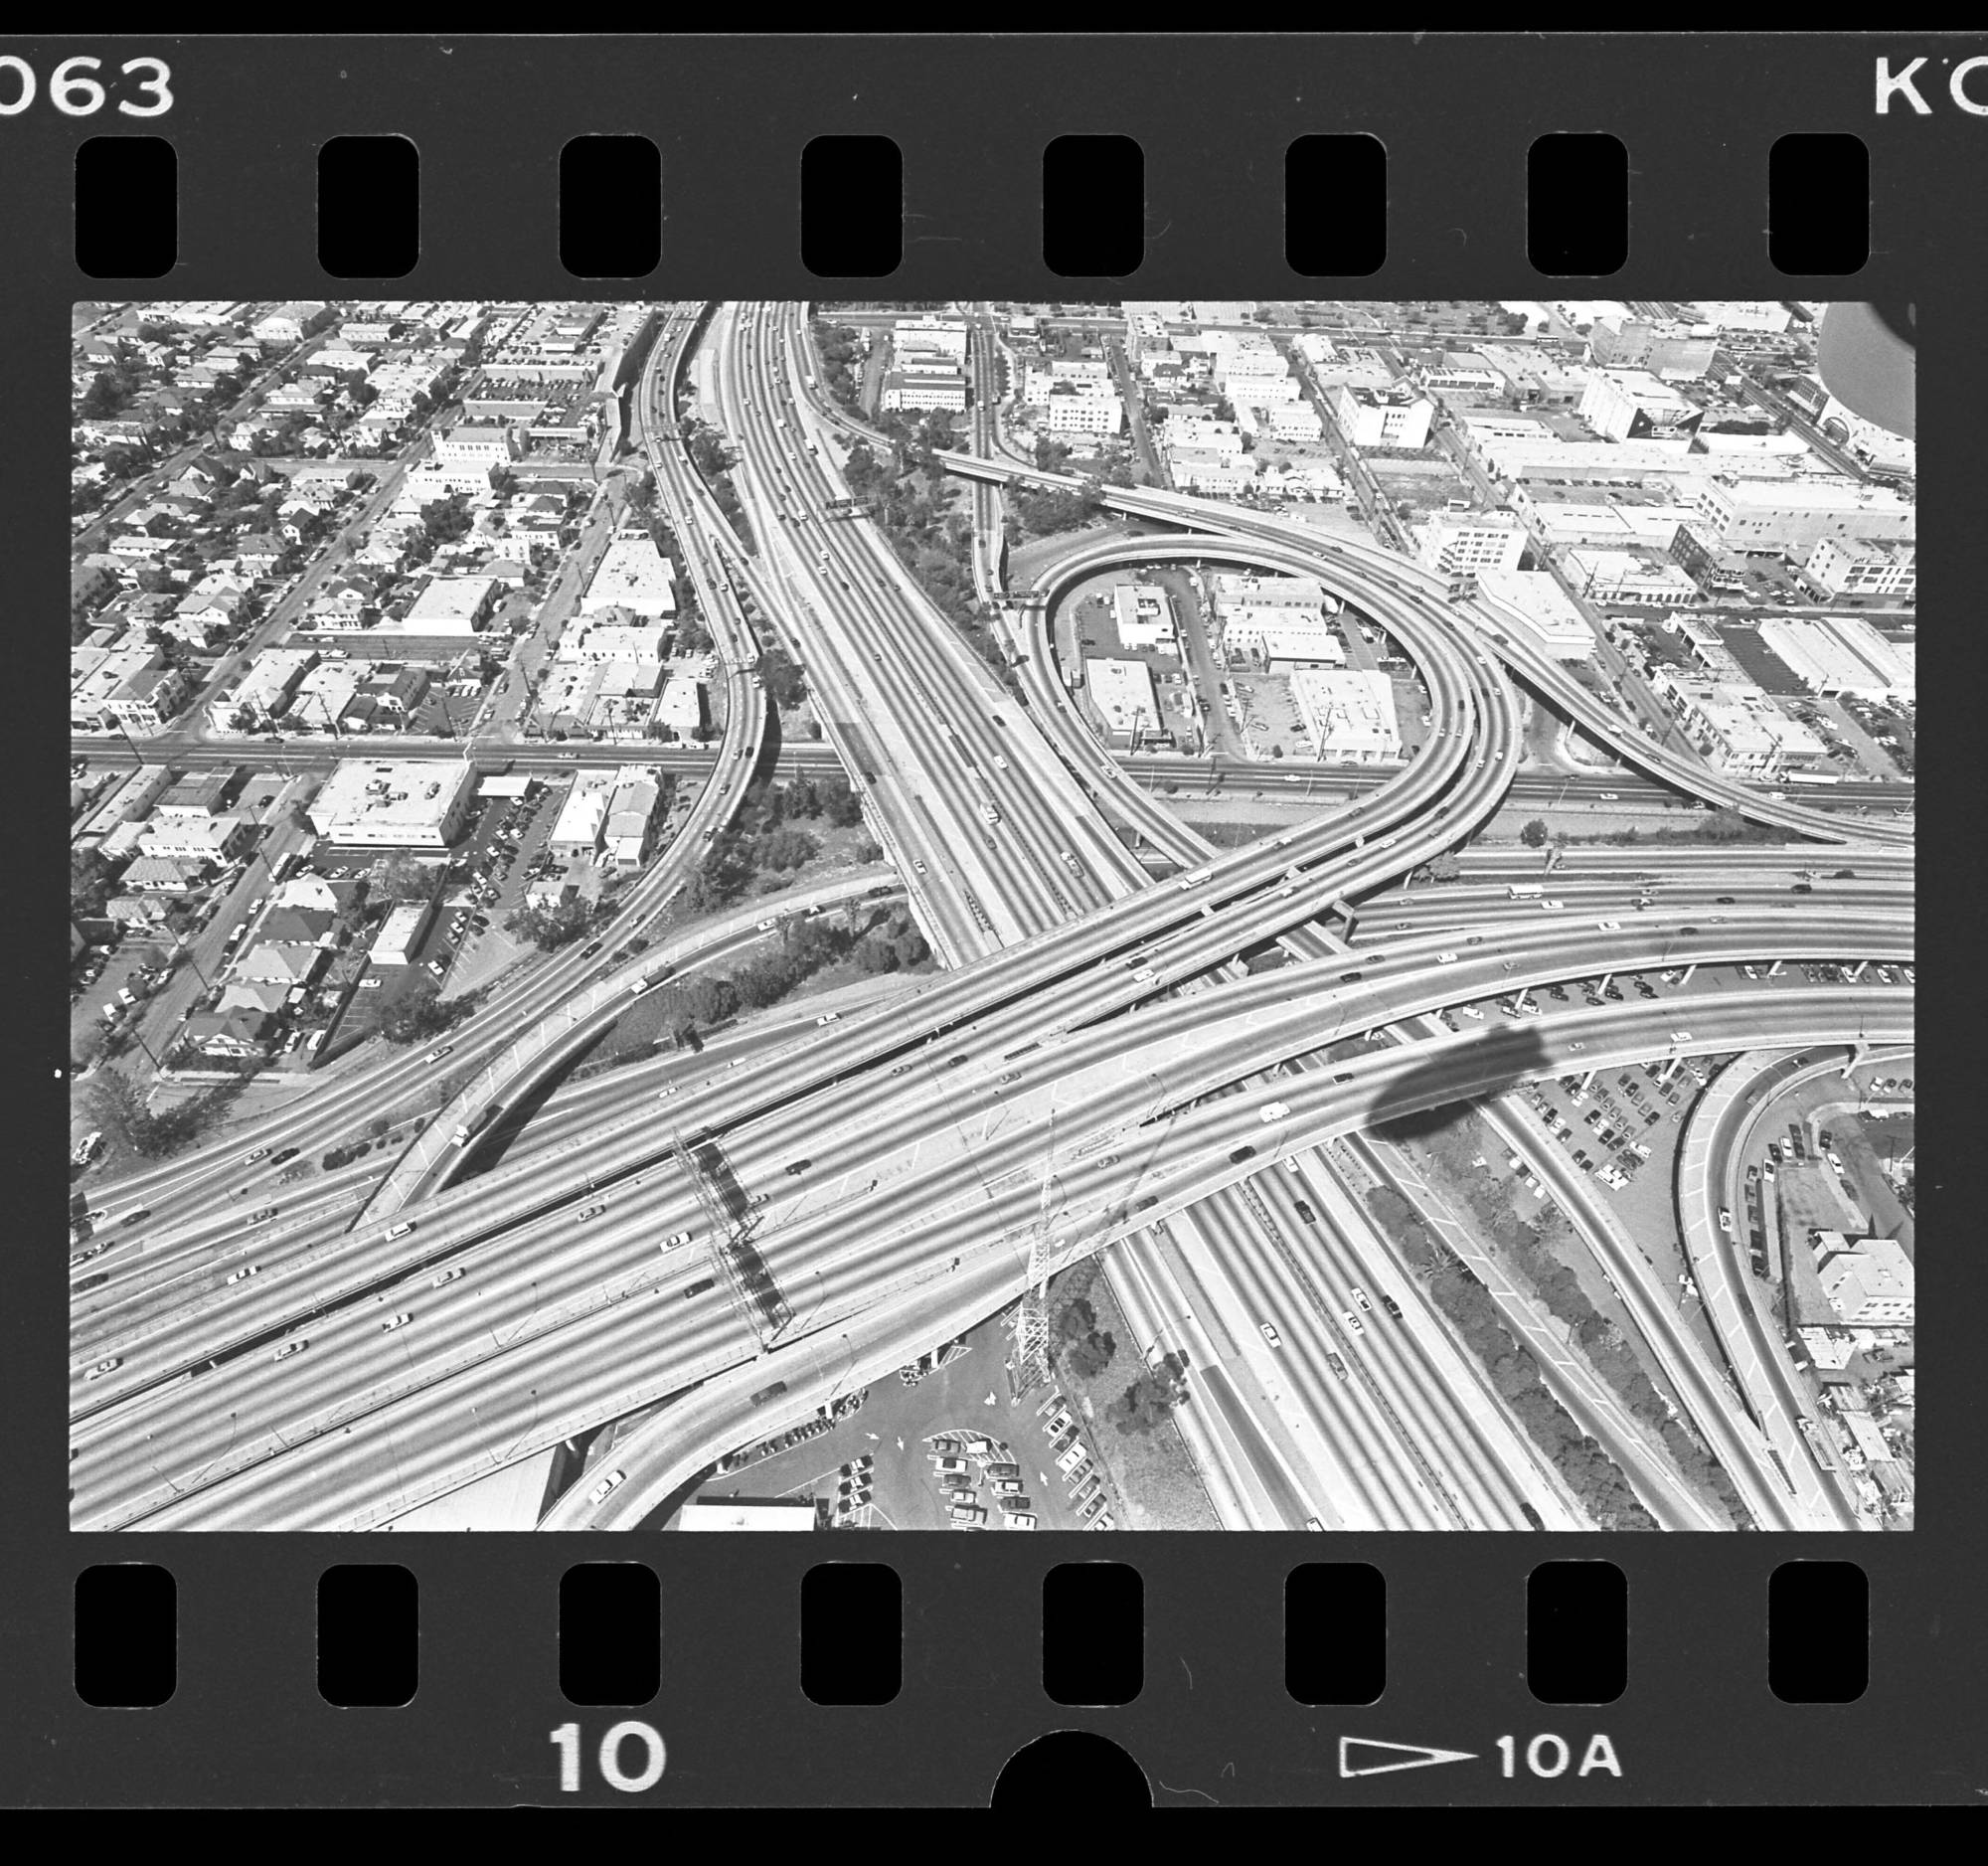 View from dirigible [blimp] of interchange of the Santa Monica and Harbor Freeways in Los Angeles, 1986